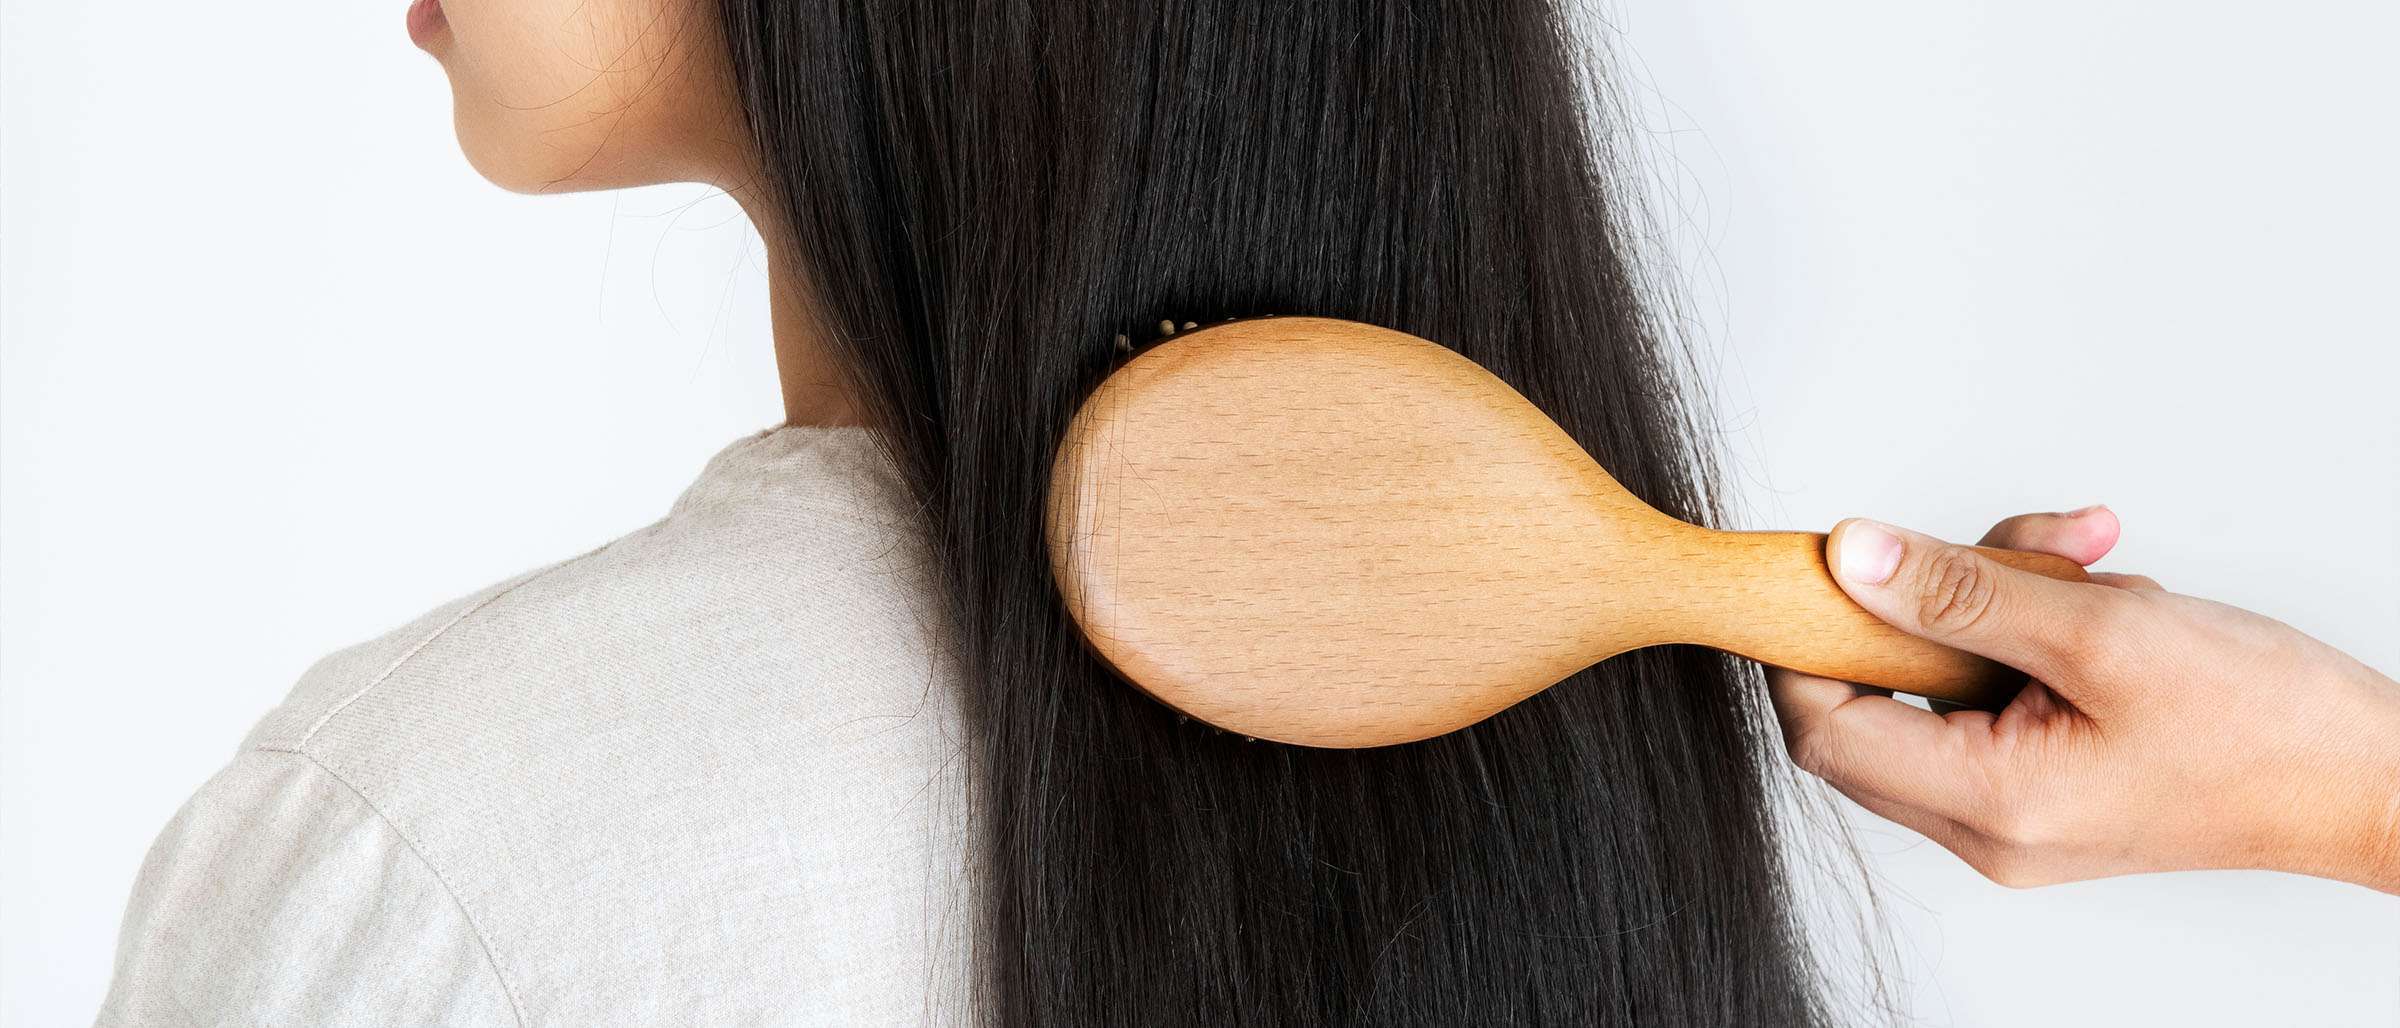 4 Steps to Protect Your Hair From Damage Done By Straighteners